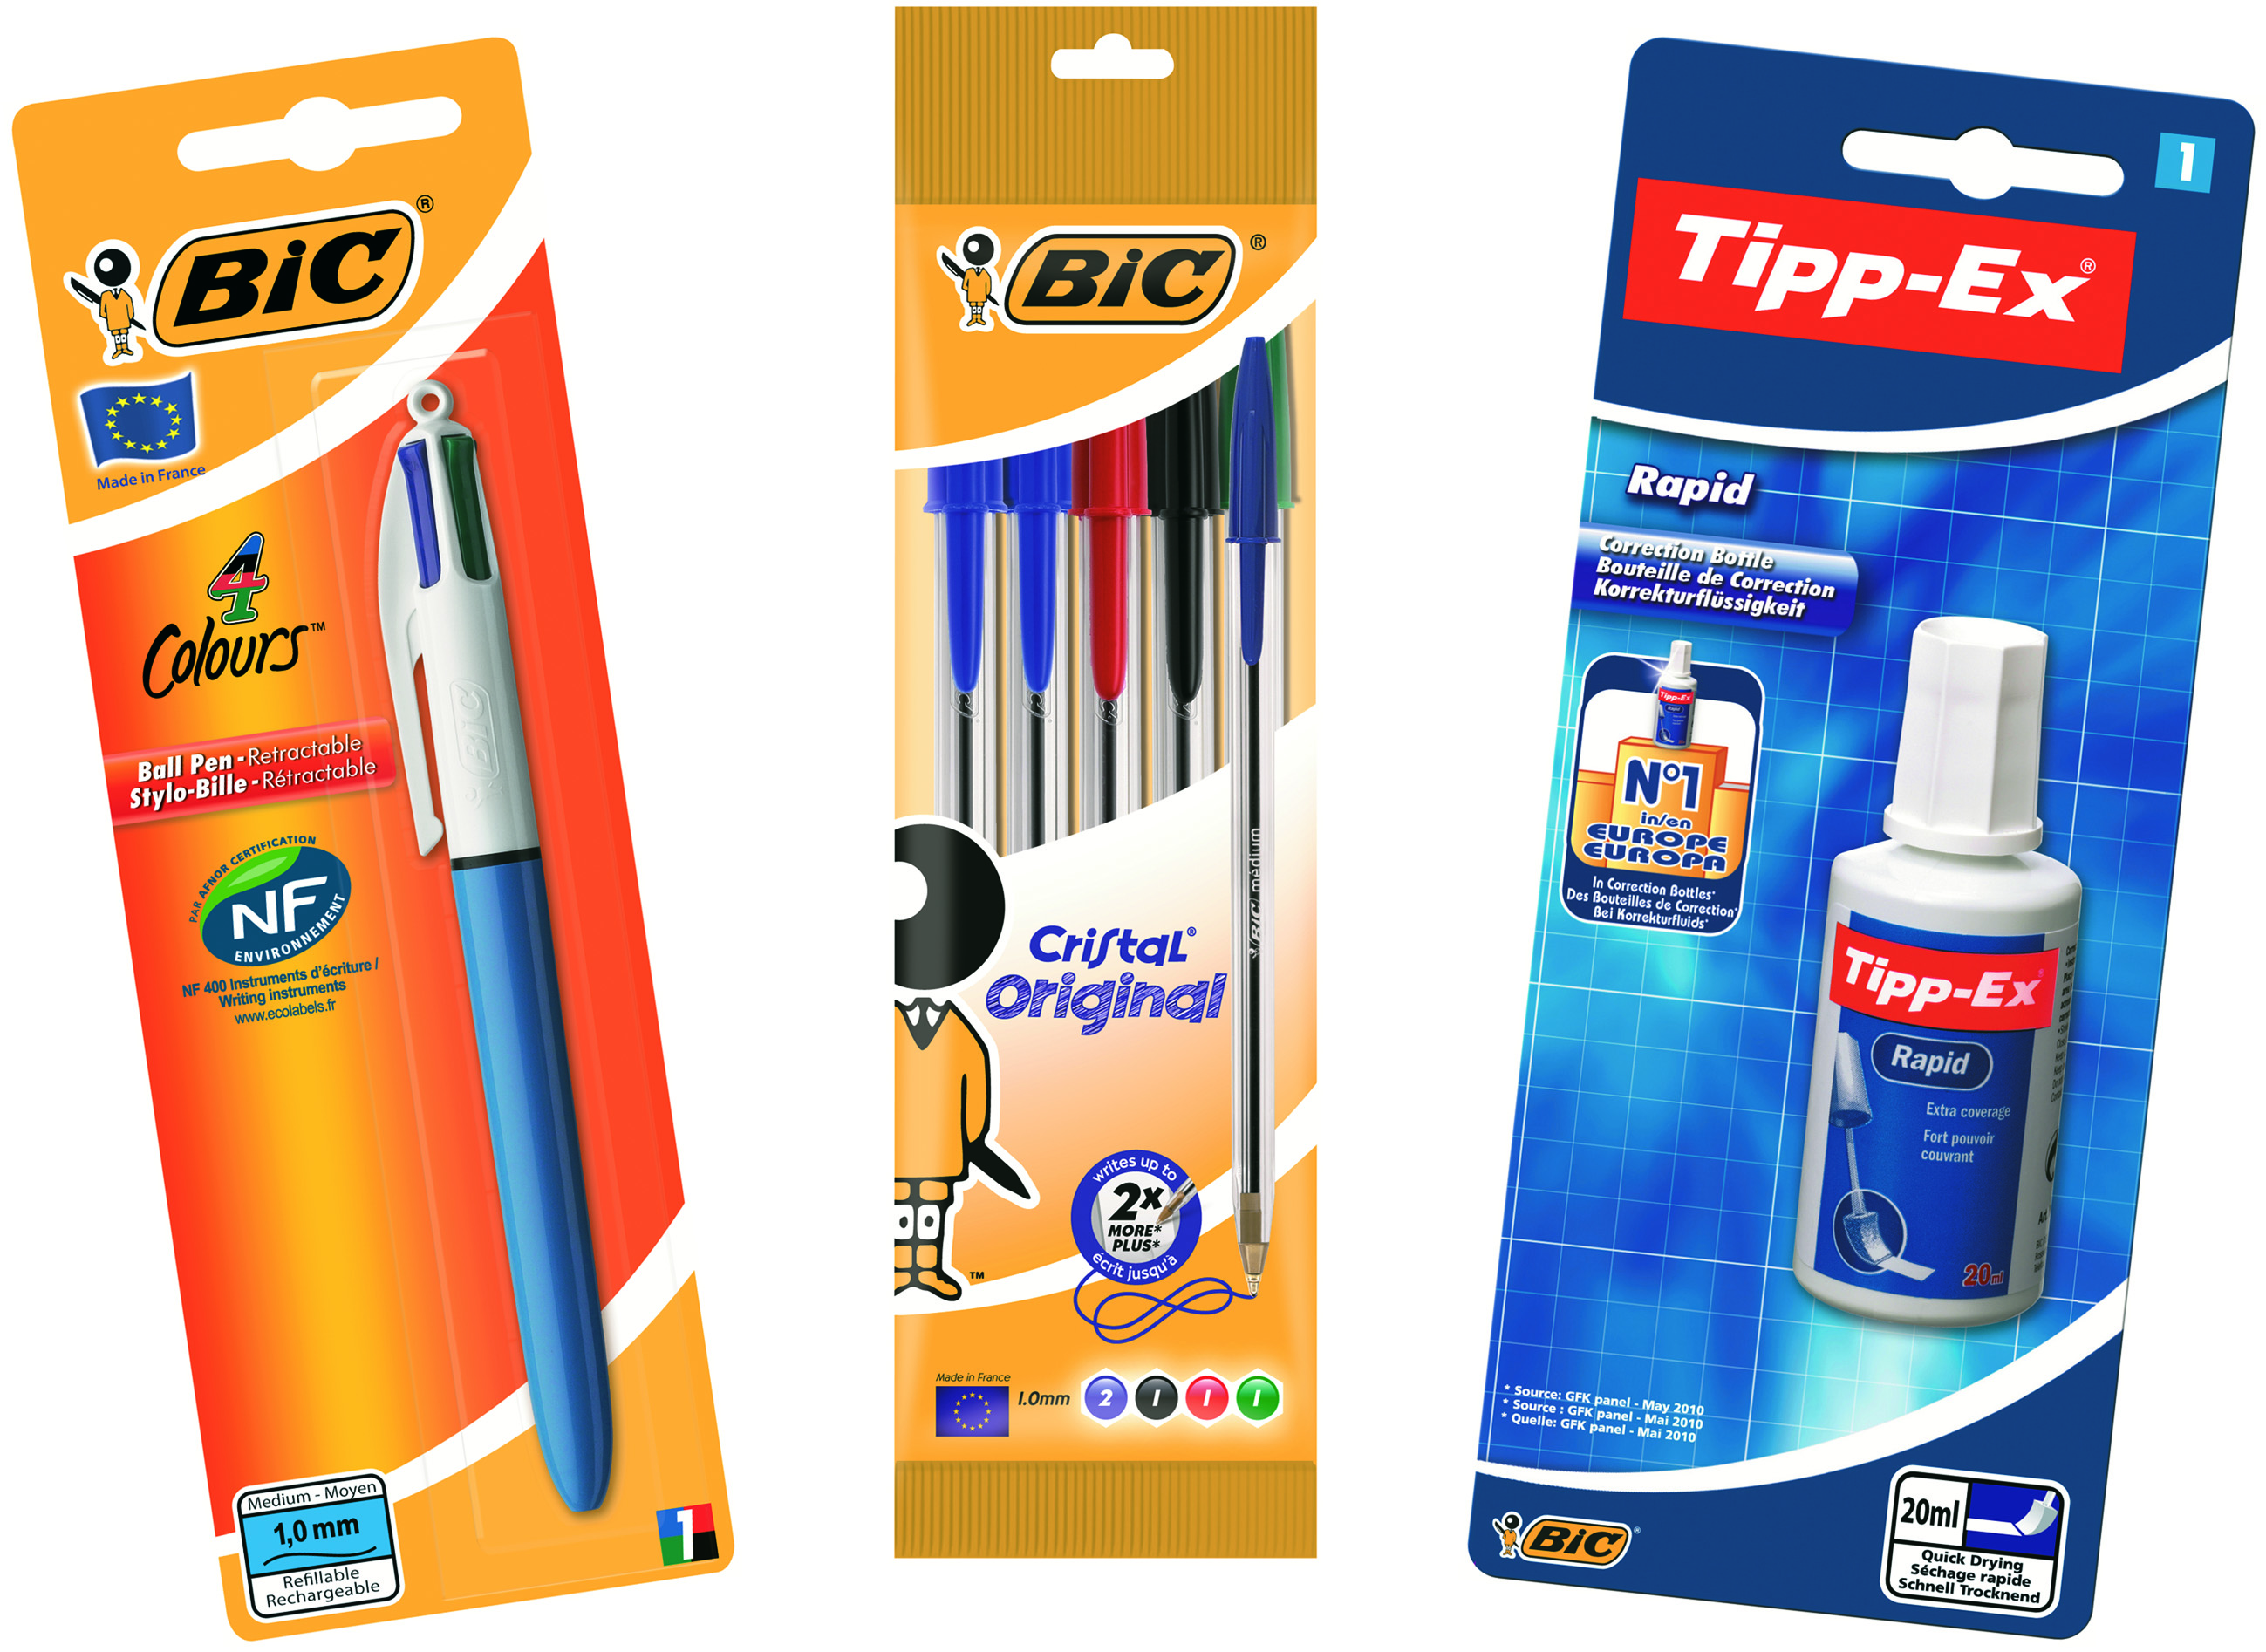 BIC offers a wide range of reliable classroom choices